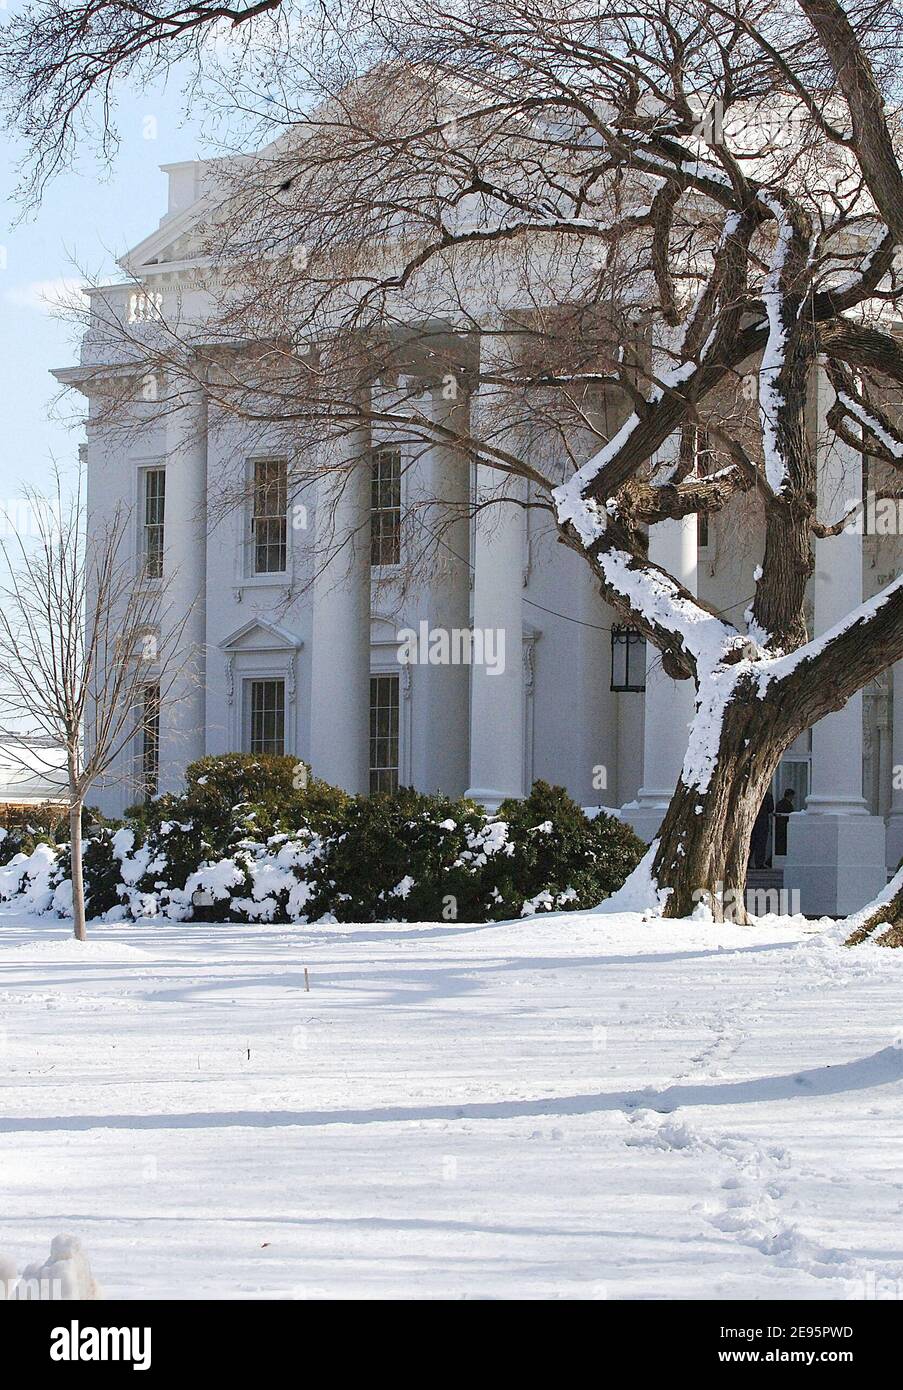 The White House, Washington, DC, USA, February 13, 2006, after a major winter storm slammed the mid-Atlantic and Northeast states. Photo by Olivier Douliery/ABACAPRESS.COM Stock Photo